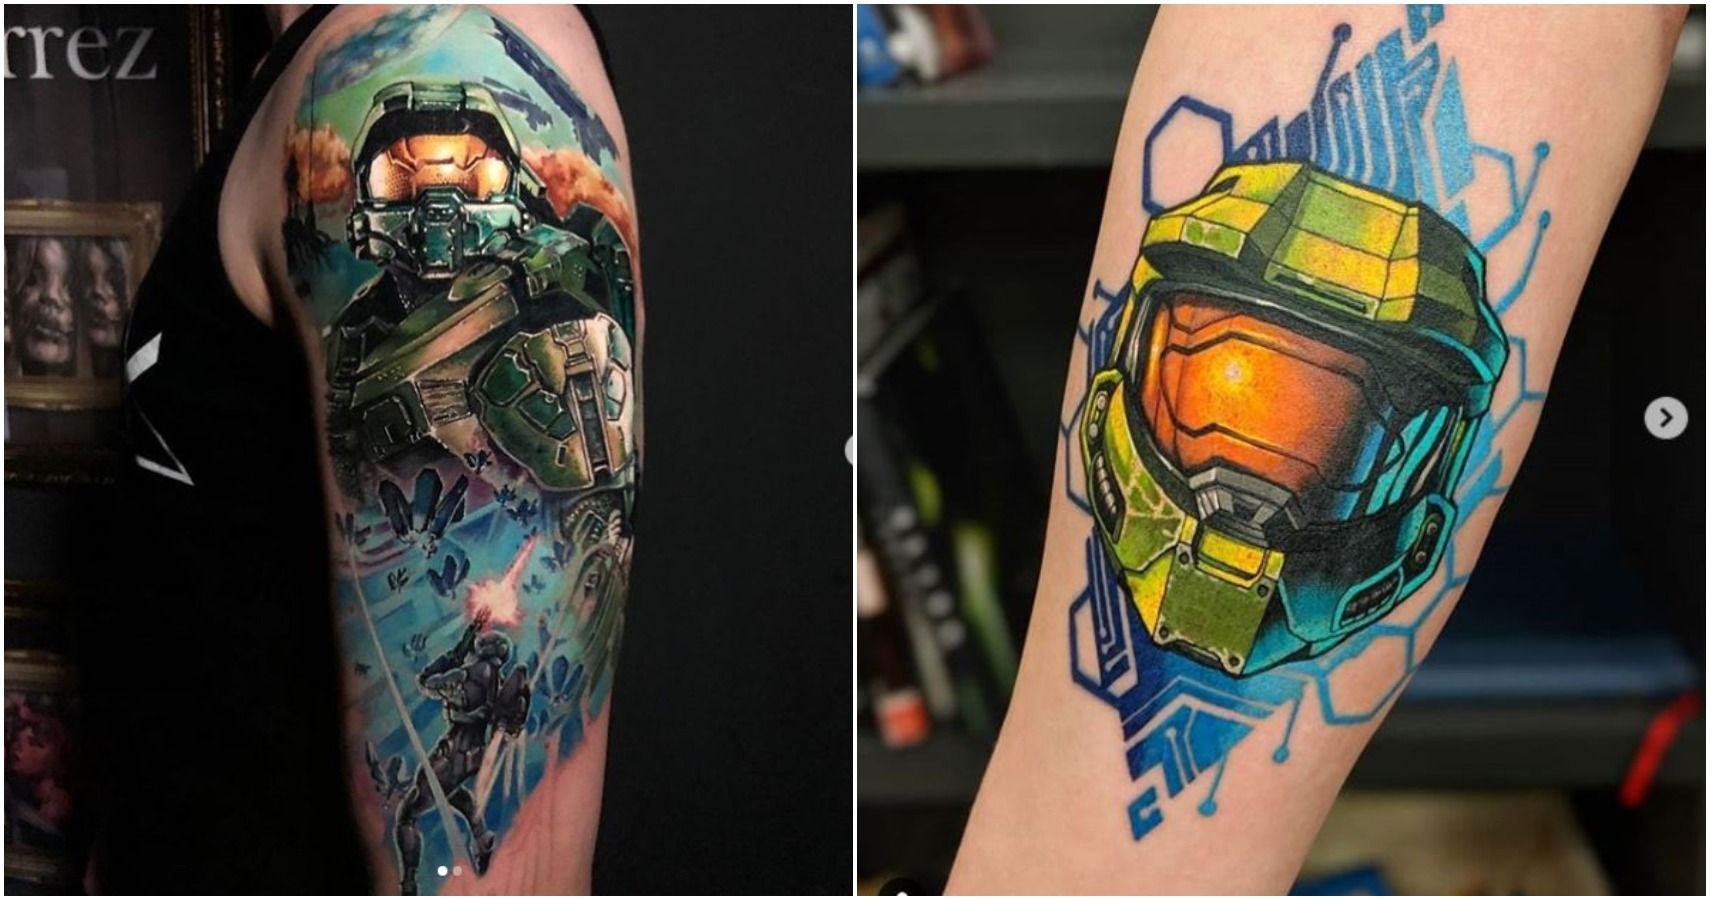 Got this great halo tattoo the other day Thought you guys might like it   rhalo